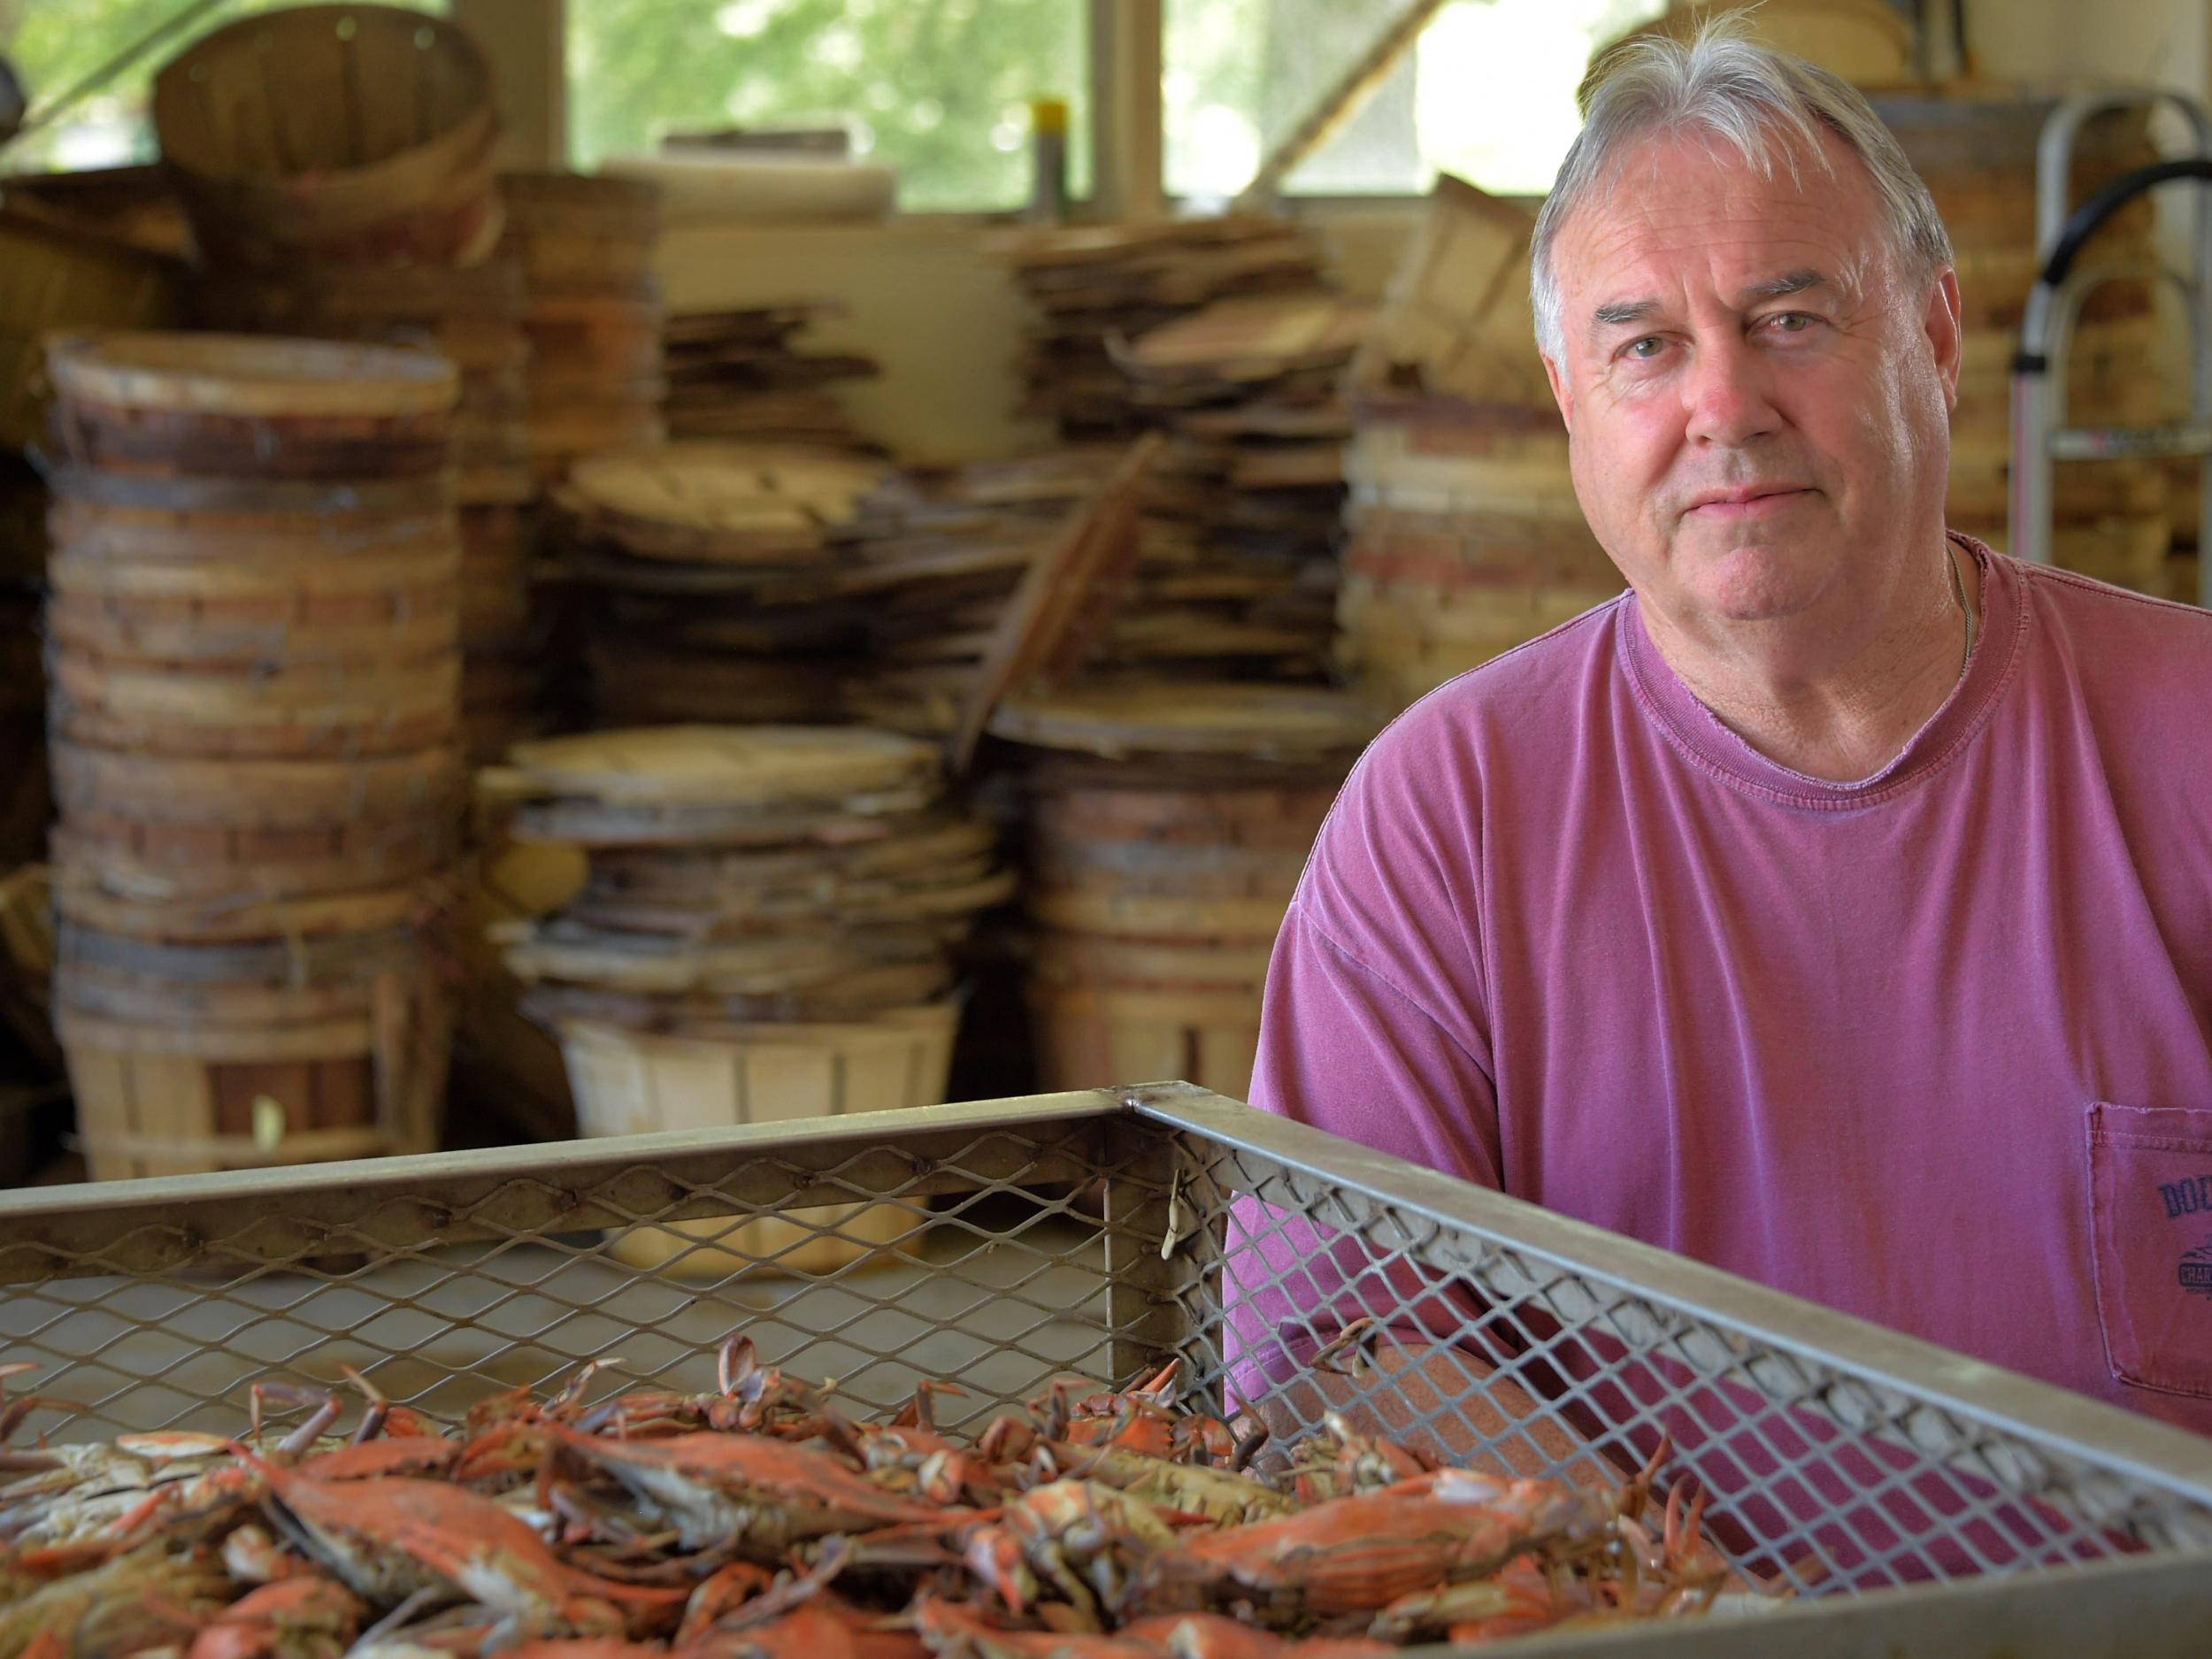 Tighter legal immigration restrictions are causing a shortage of crab pickers, putting businesses that rely on foreign labour, such as GW Hall and Sons, at risk